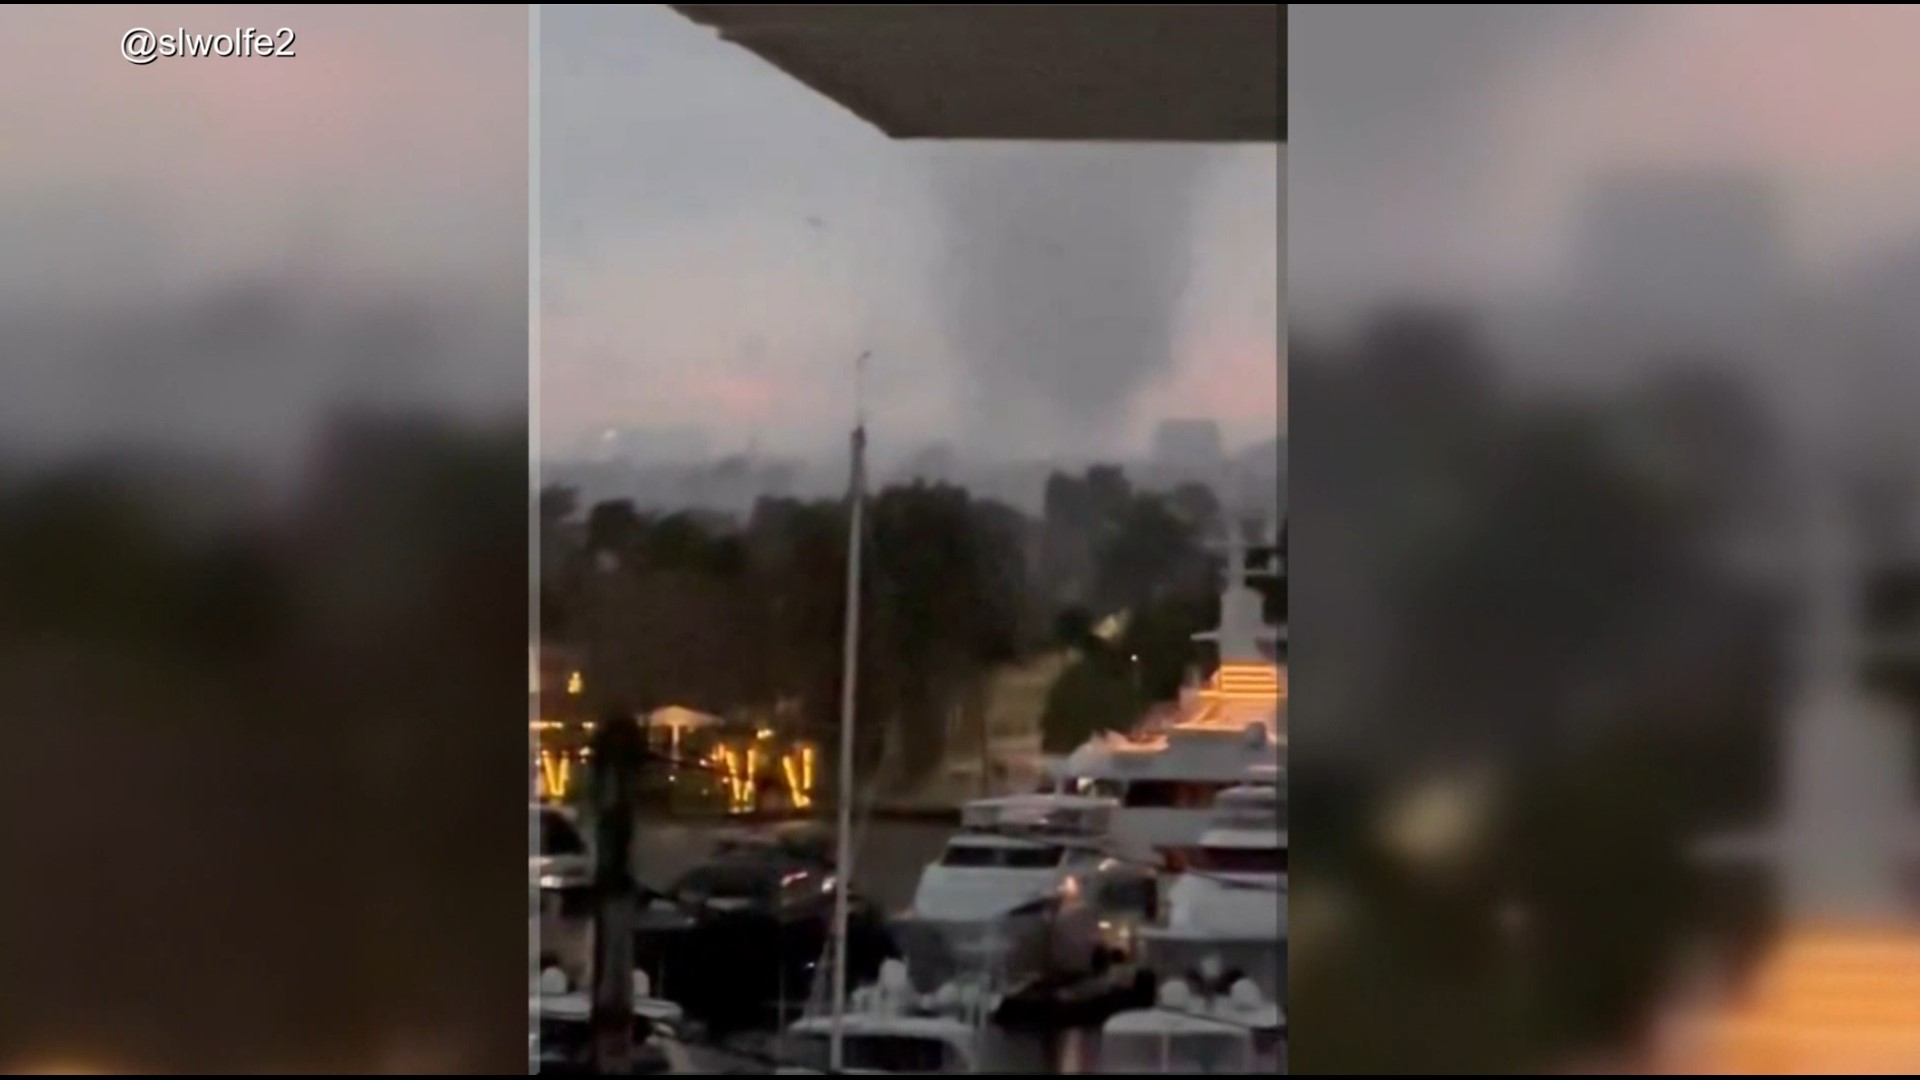 A potential tornado touched down Saturday (1/6) near Las Olas and the Intracoastal in Fort Lauderdale.